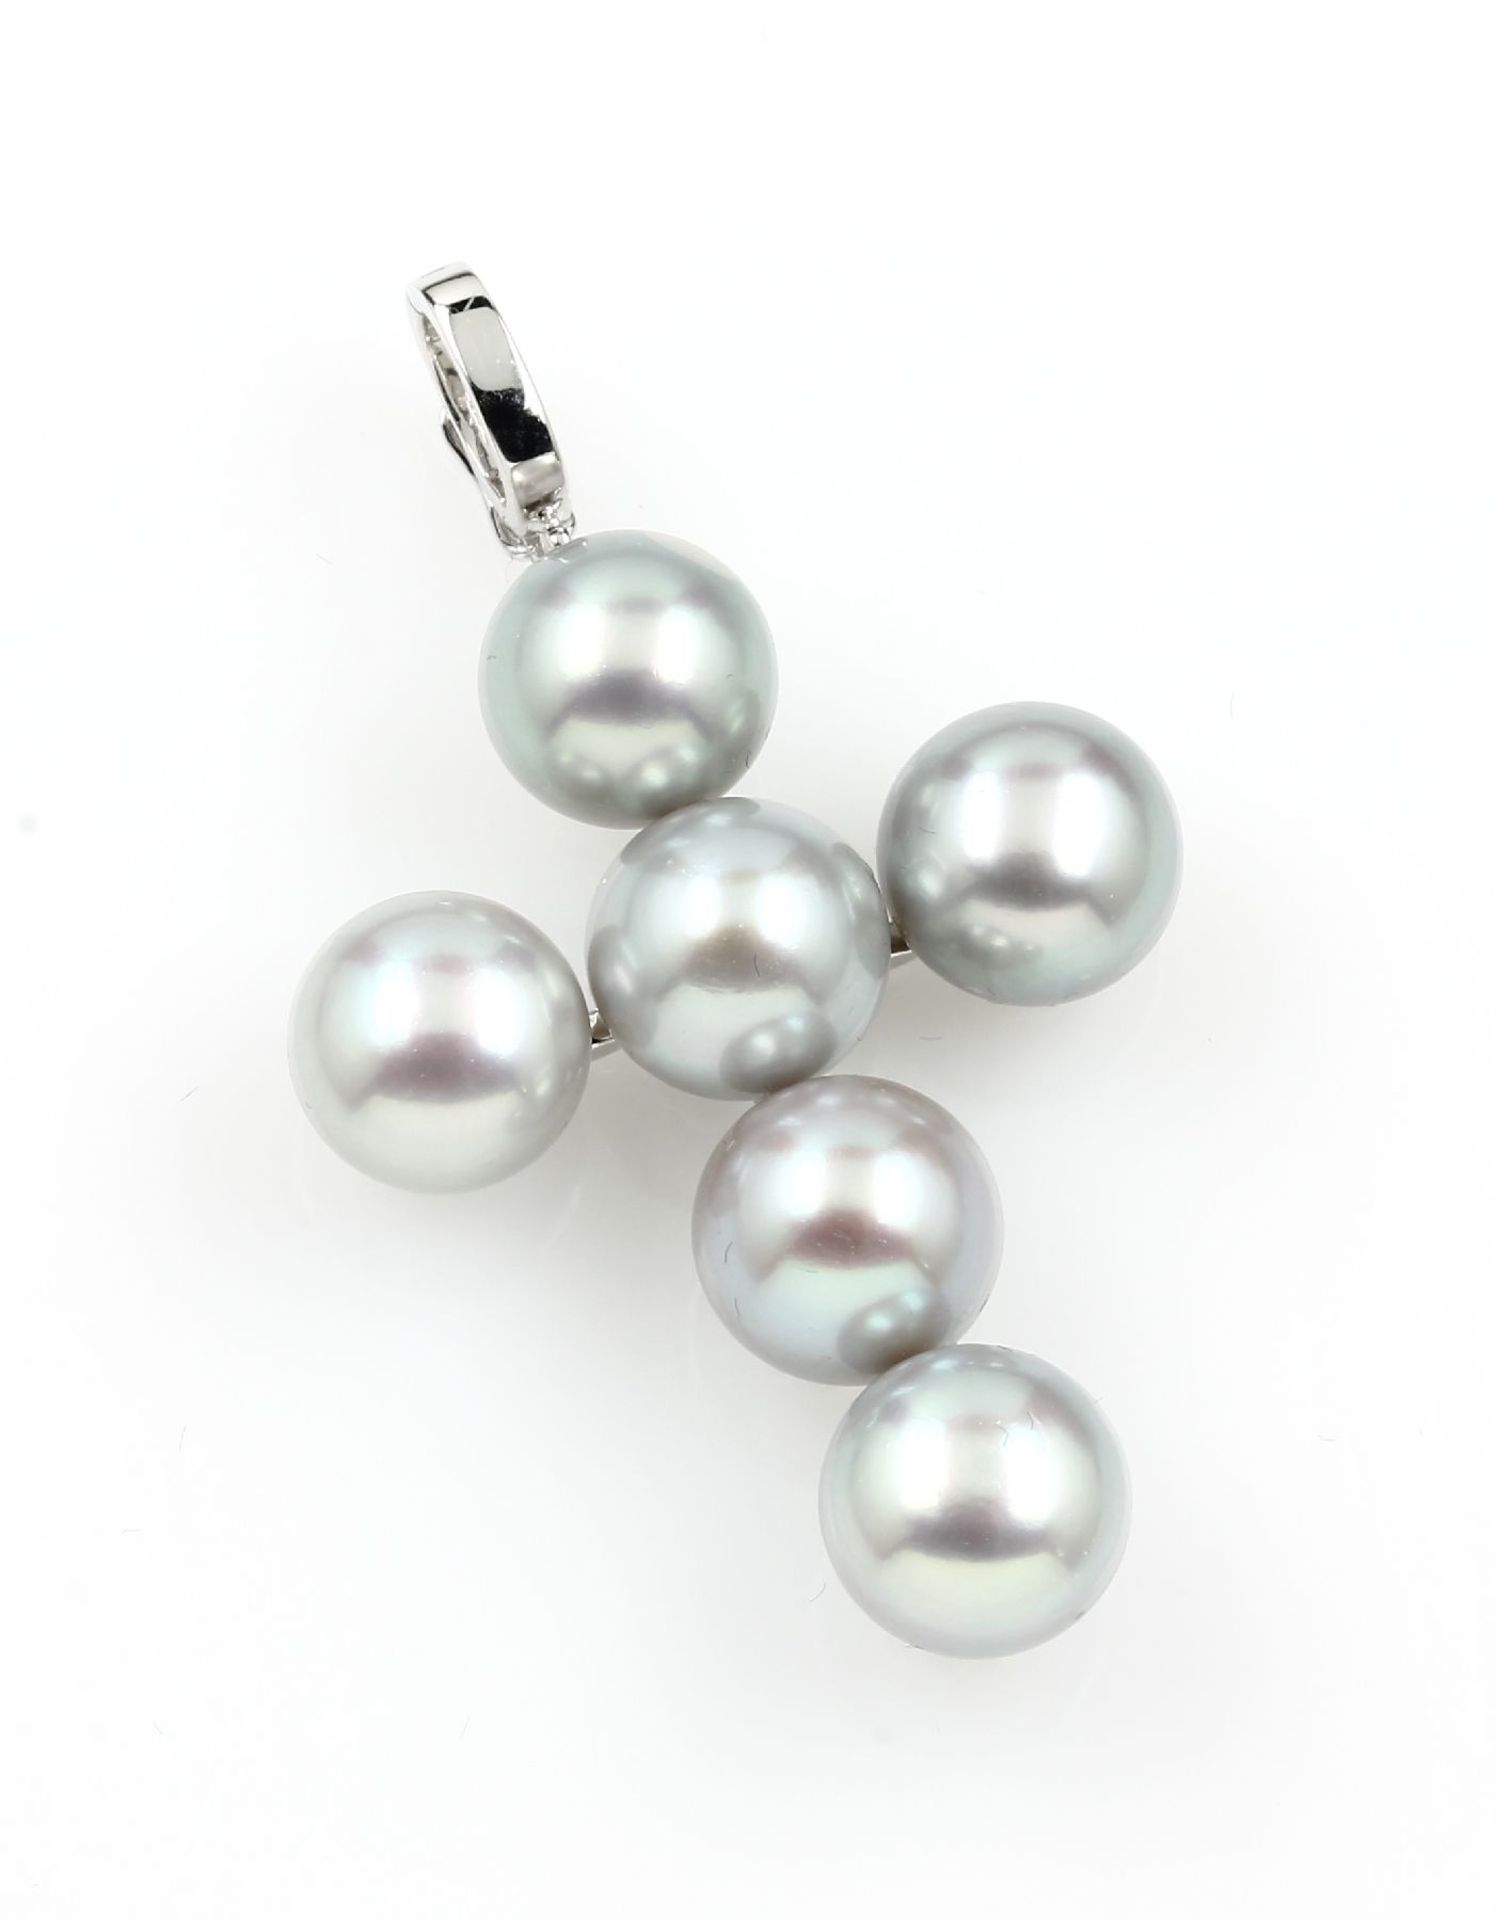 14 kt gold crosspendant with tahitian pearls , WG 585/000, light grey cultured tahitian pearls,